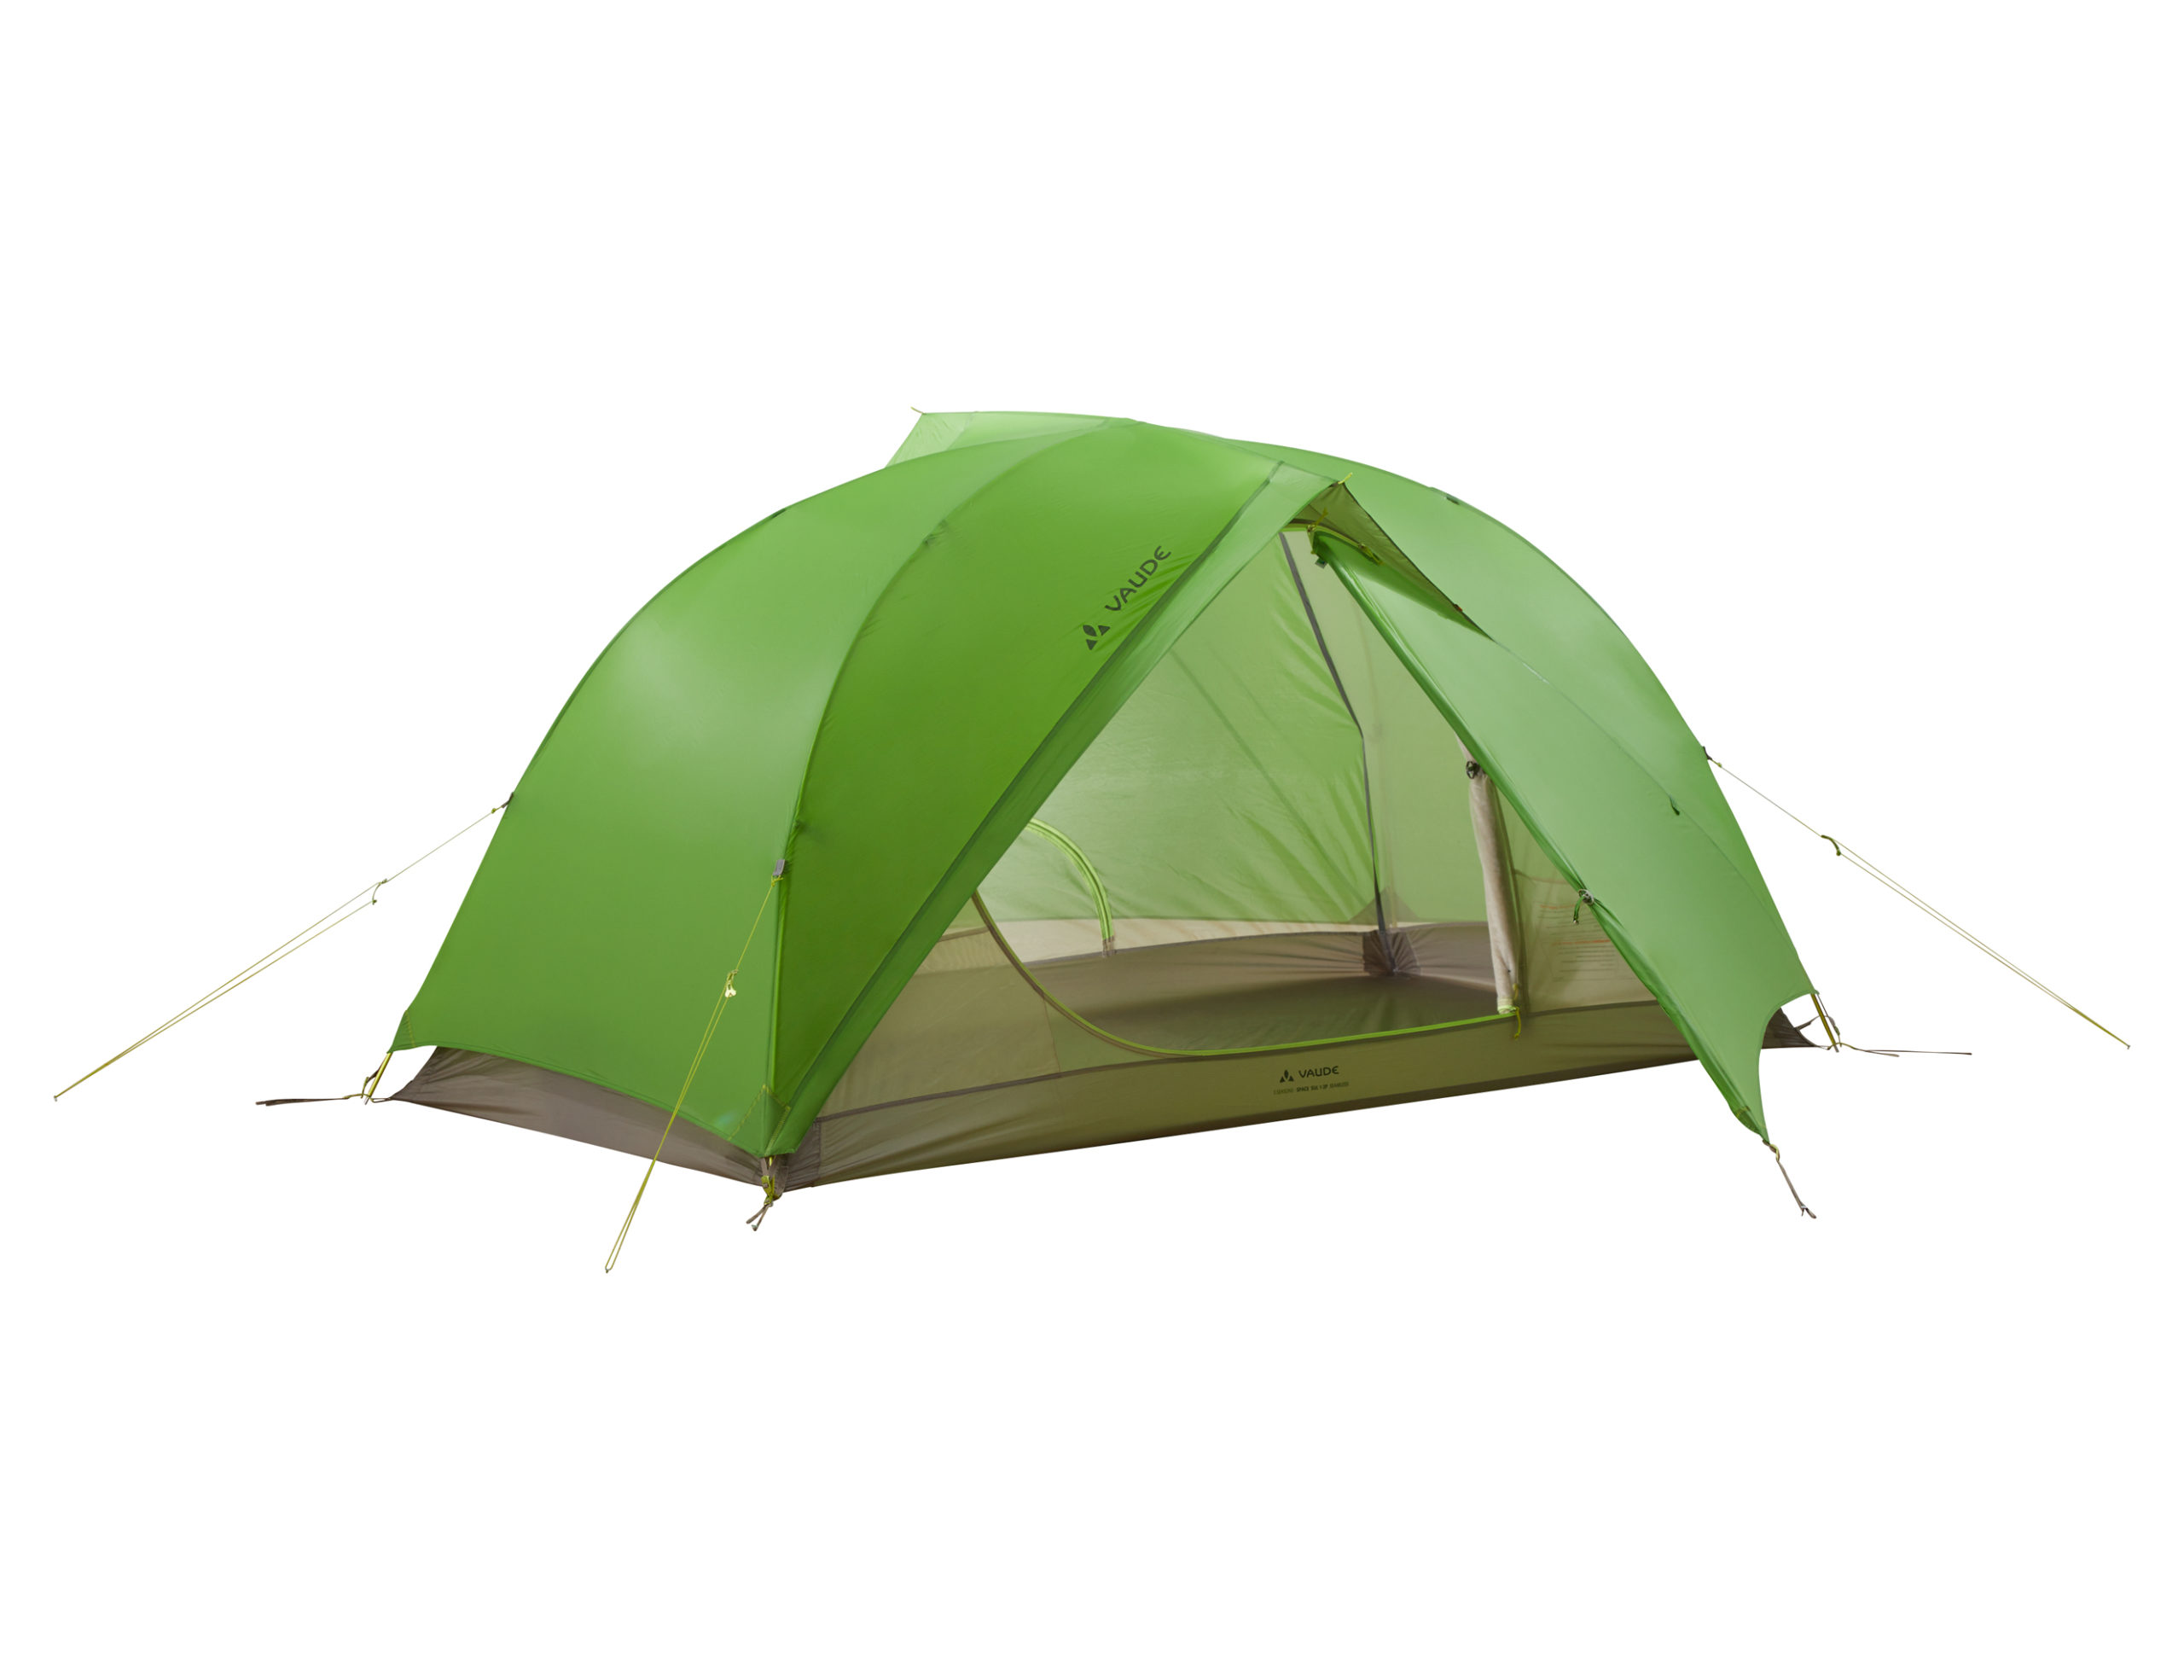 Stick to Tent Tents Polished Chrome Steel or Satin Made in Italy 